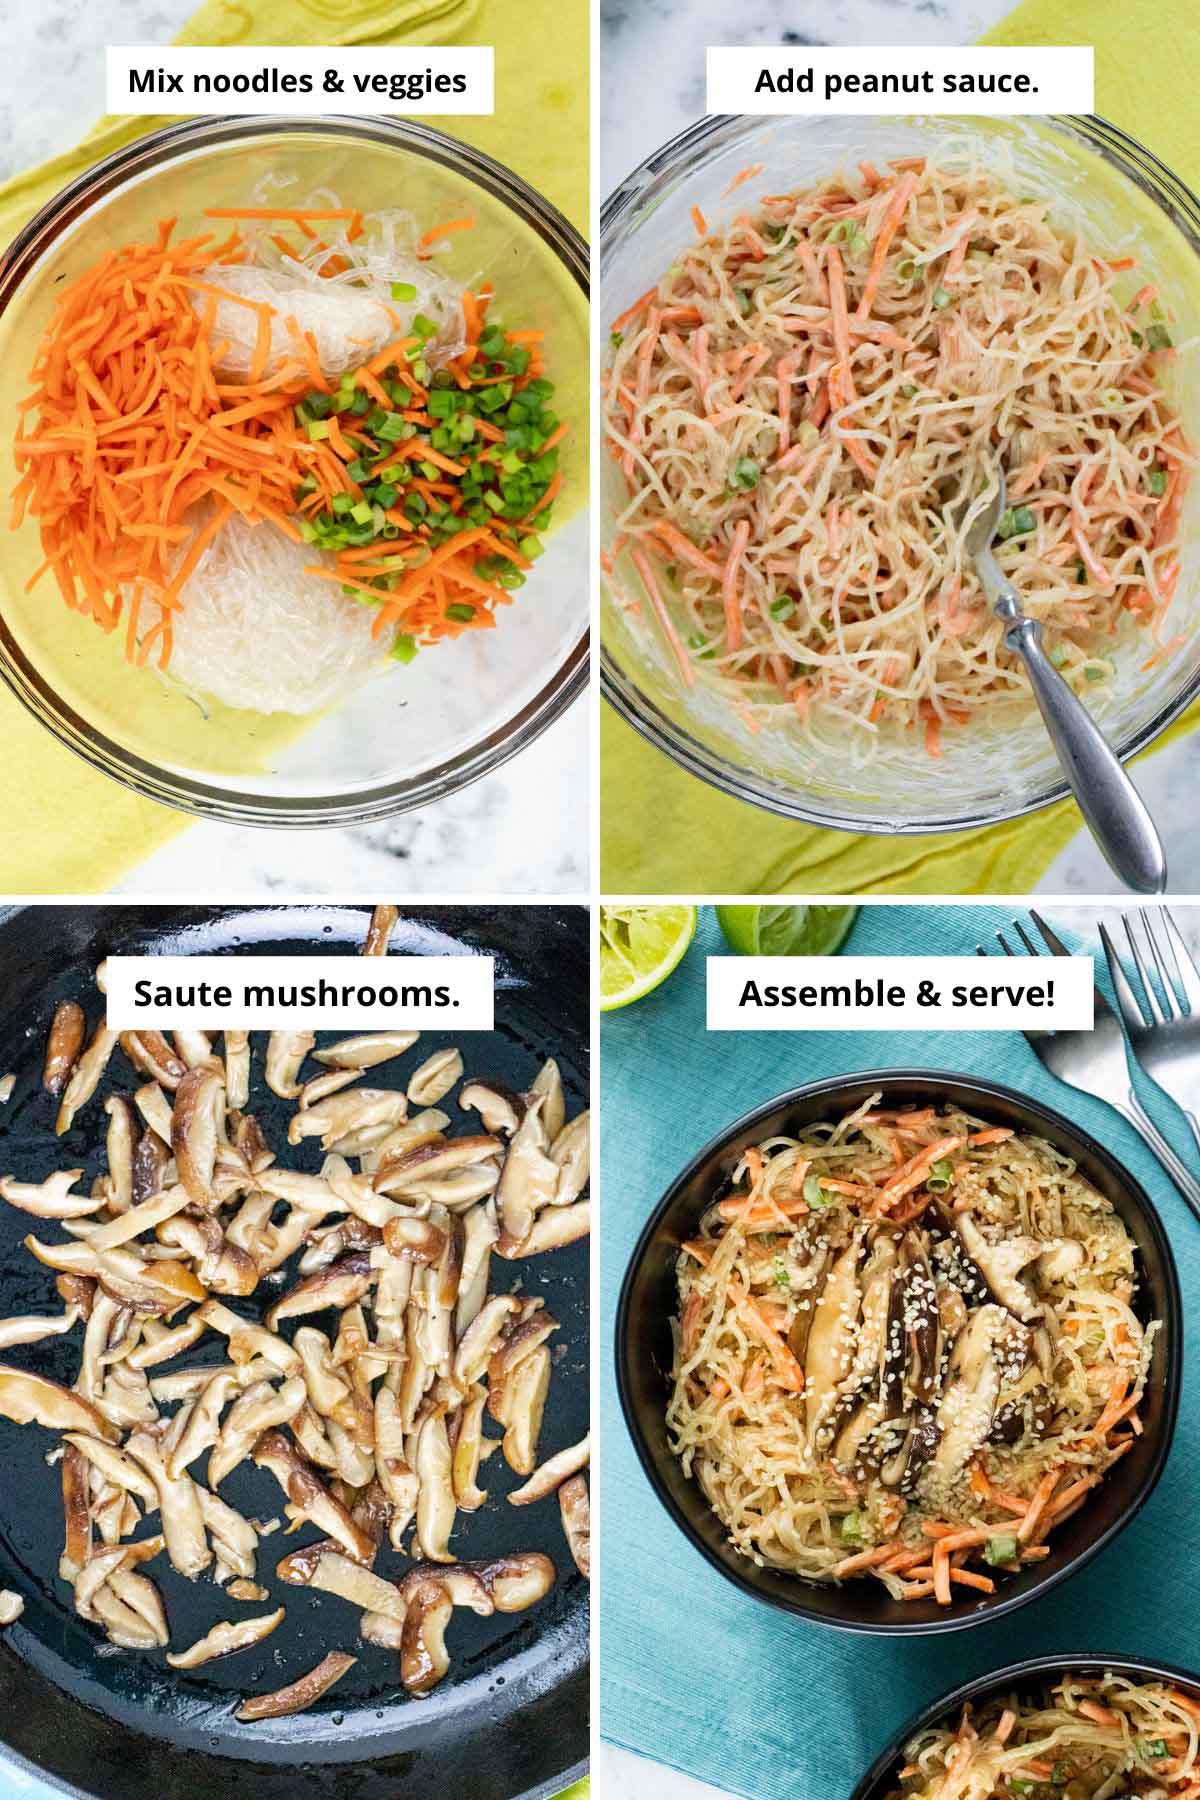 image collage showing the kelp noodles and veggies in a bowl, after mixing in the peanut sauce, the mushrooms in the pan, and the fully assembled kelp noodle salad in a bowl